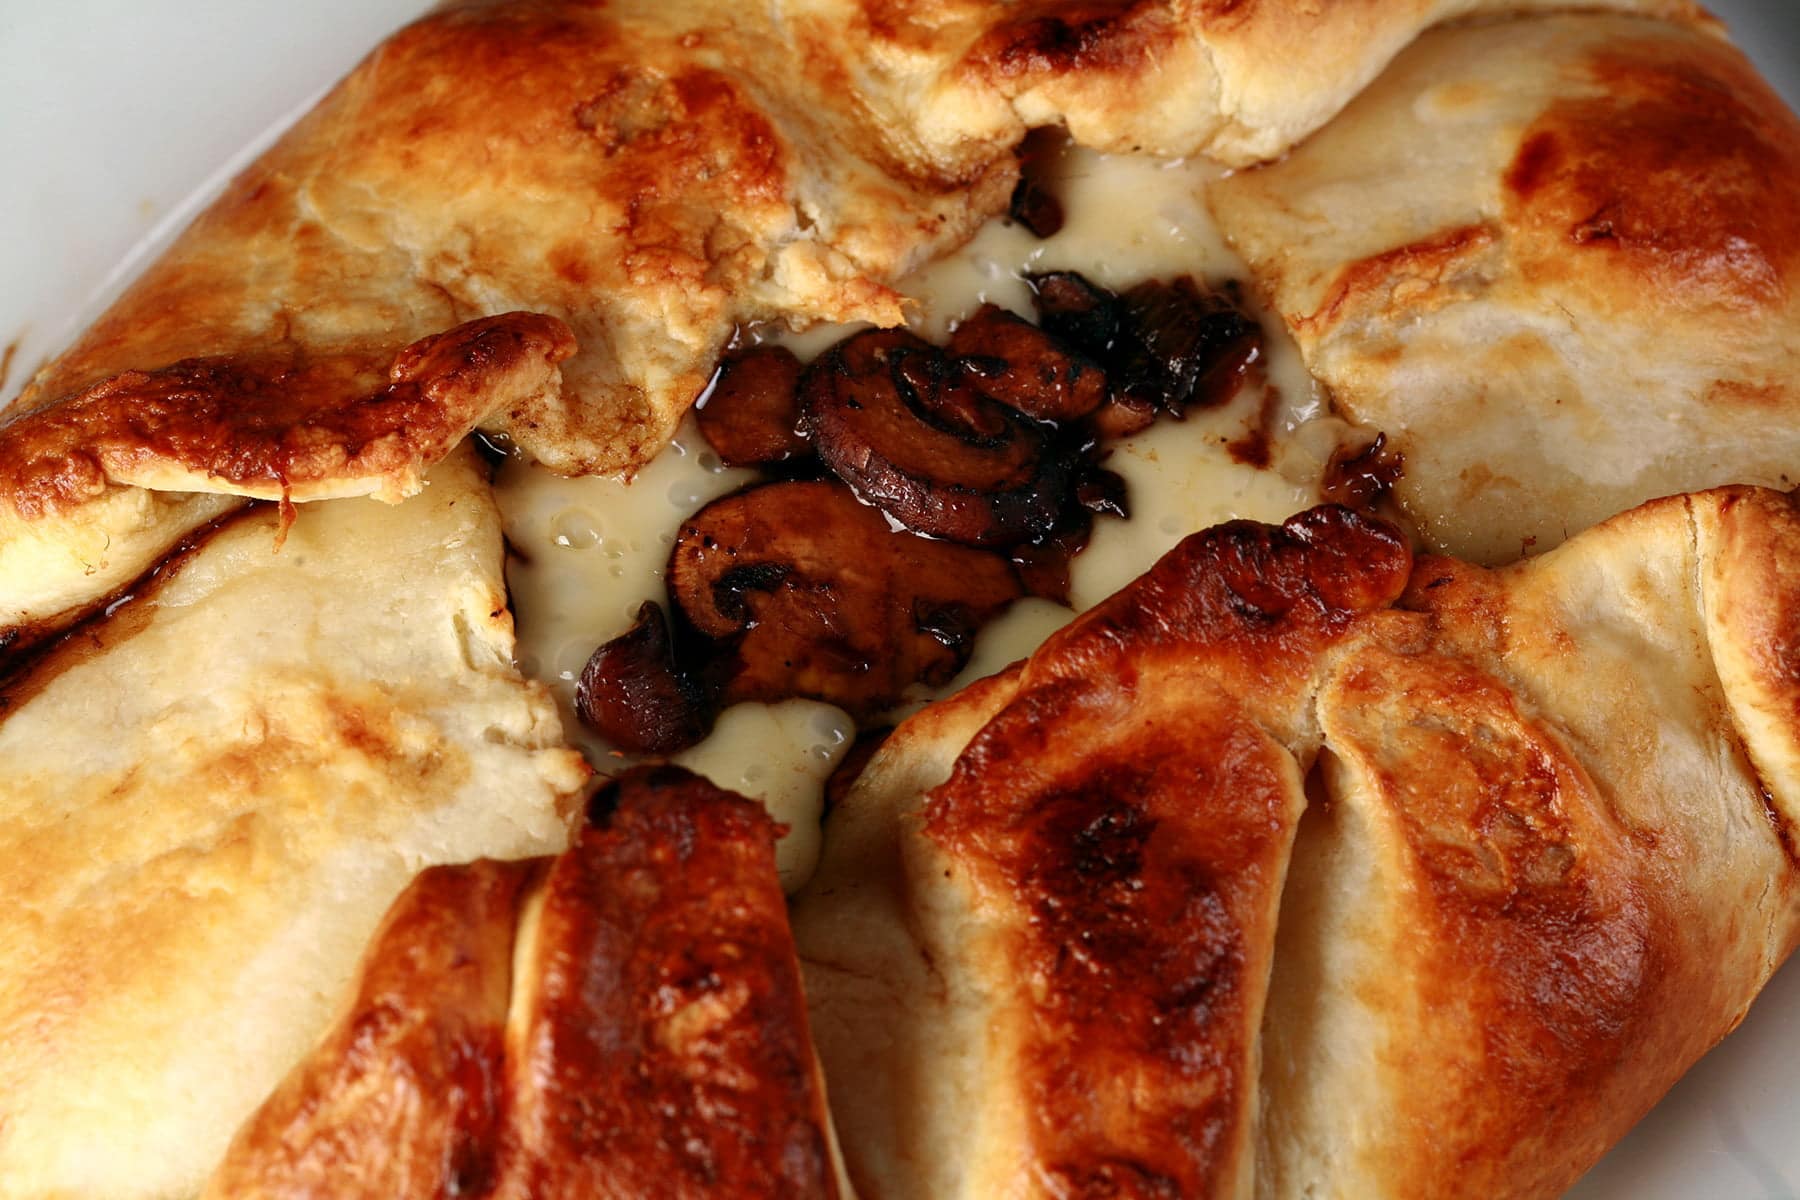 An oval shaped baked brie. Melted cheese and mushrooms are visible in the center.